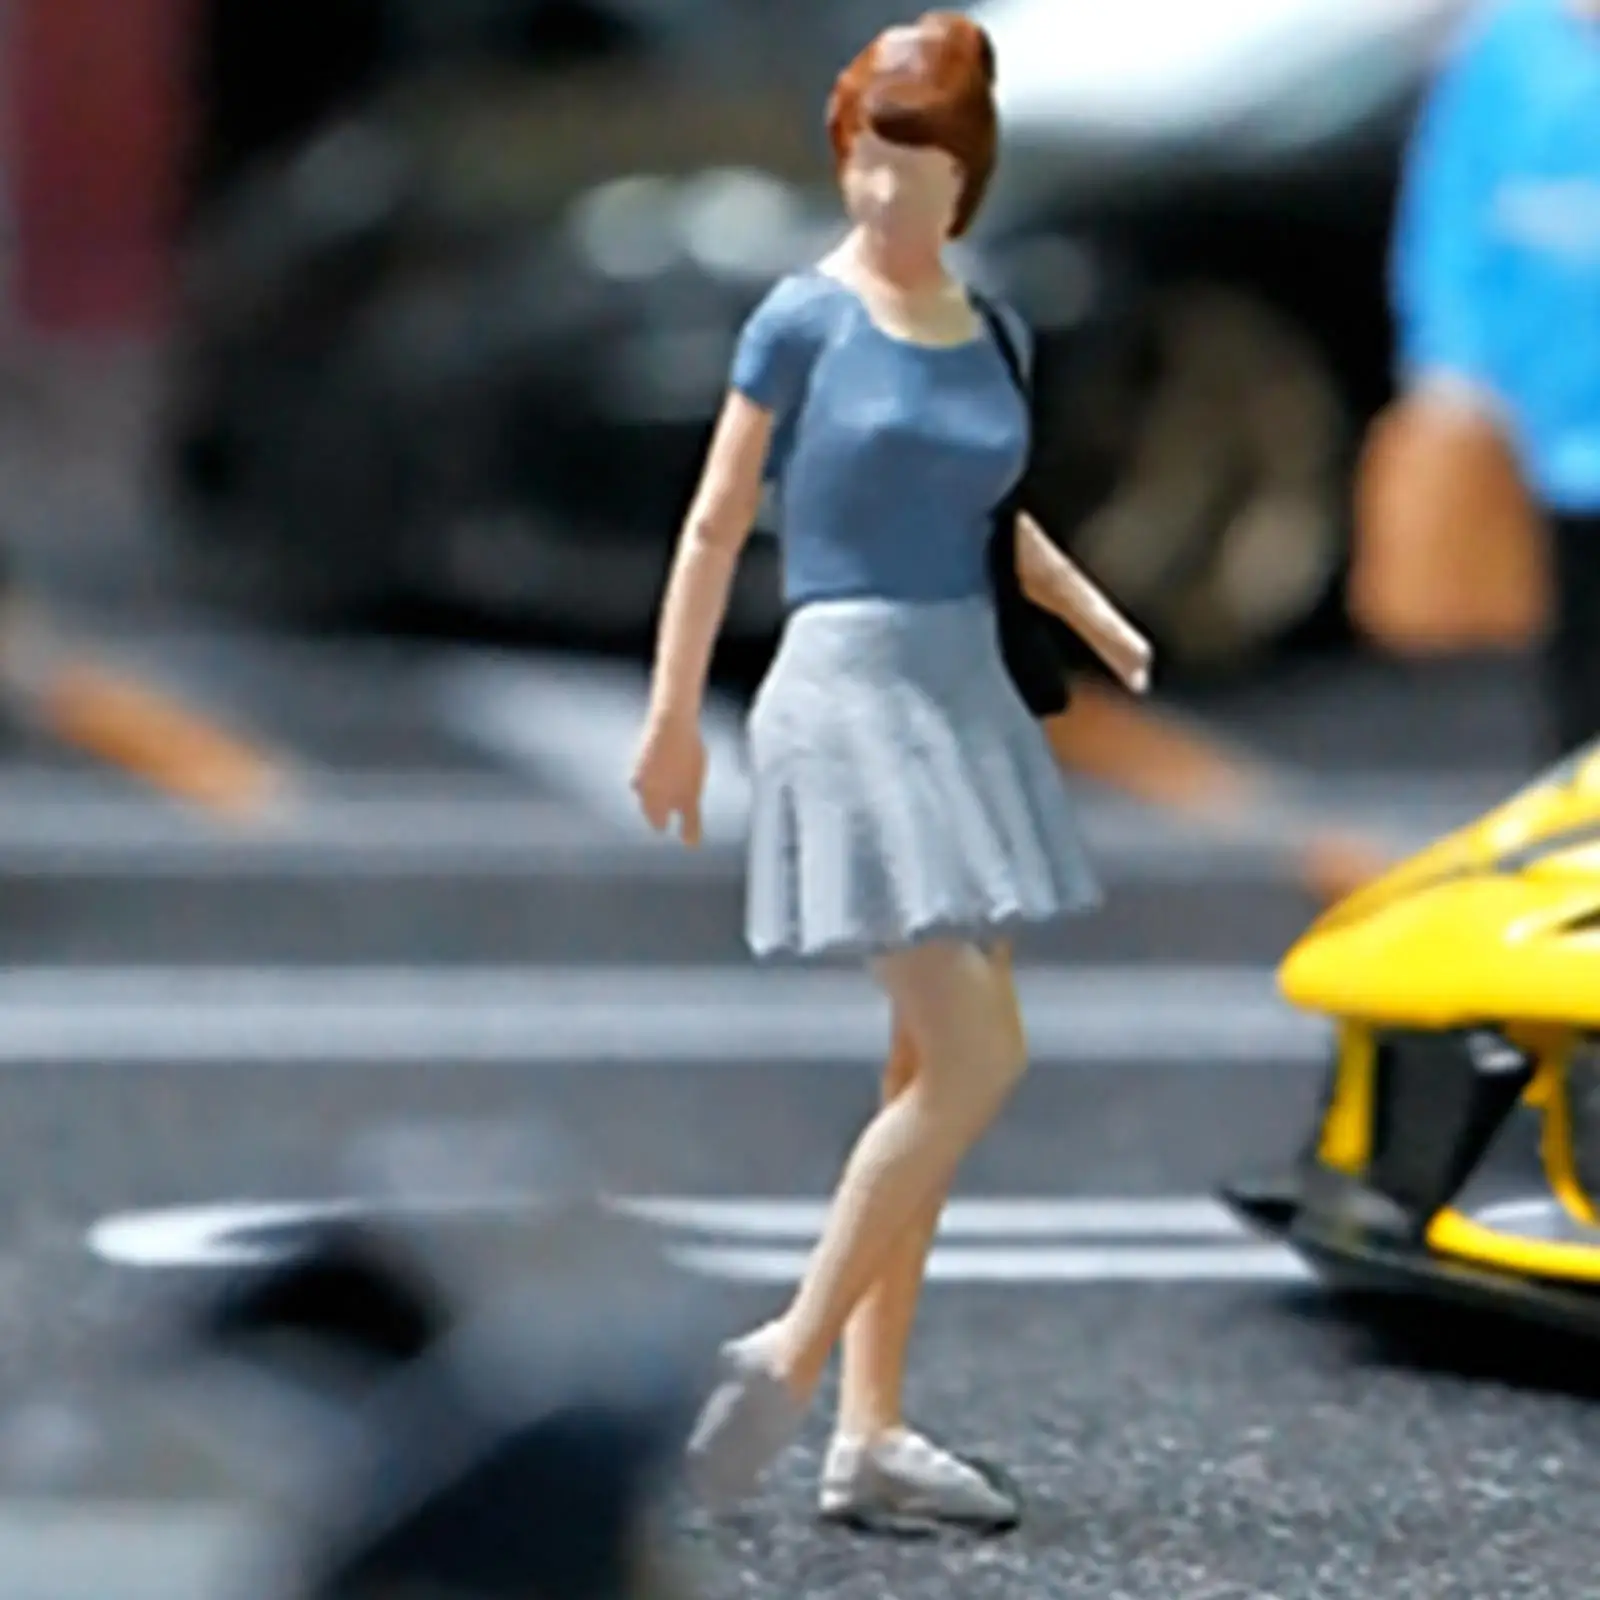 Miniature Figure Blue Skirt Girl Painted Model Building Kits for Railway Desktop Ornament Collections Architecture Model S Scale